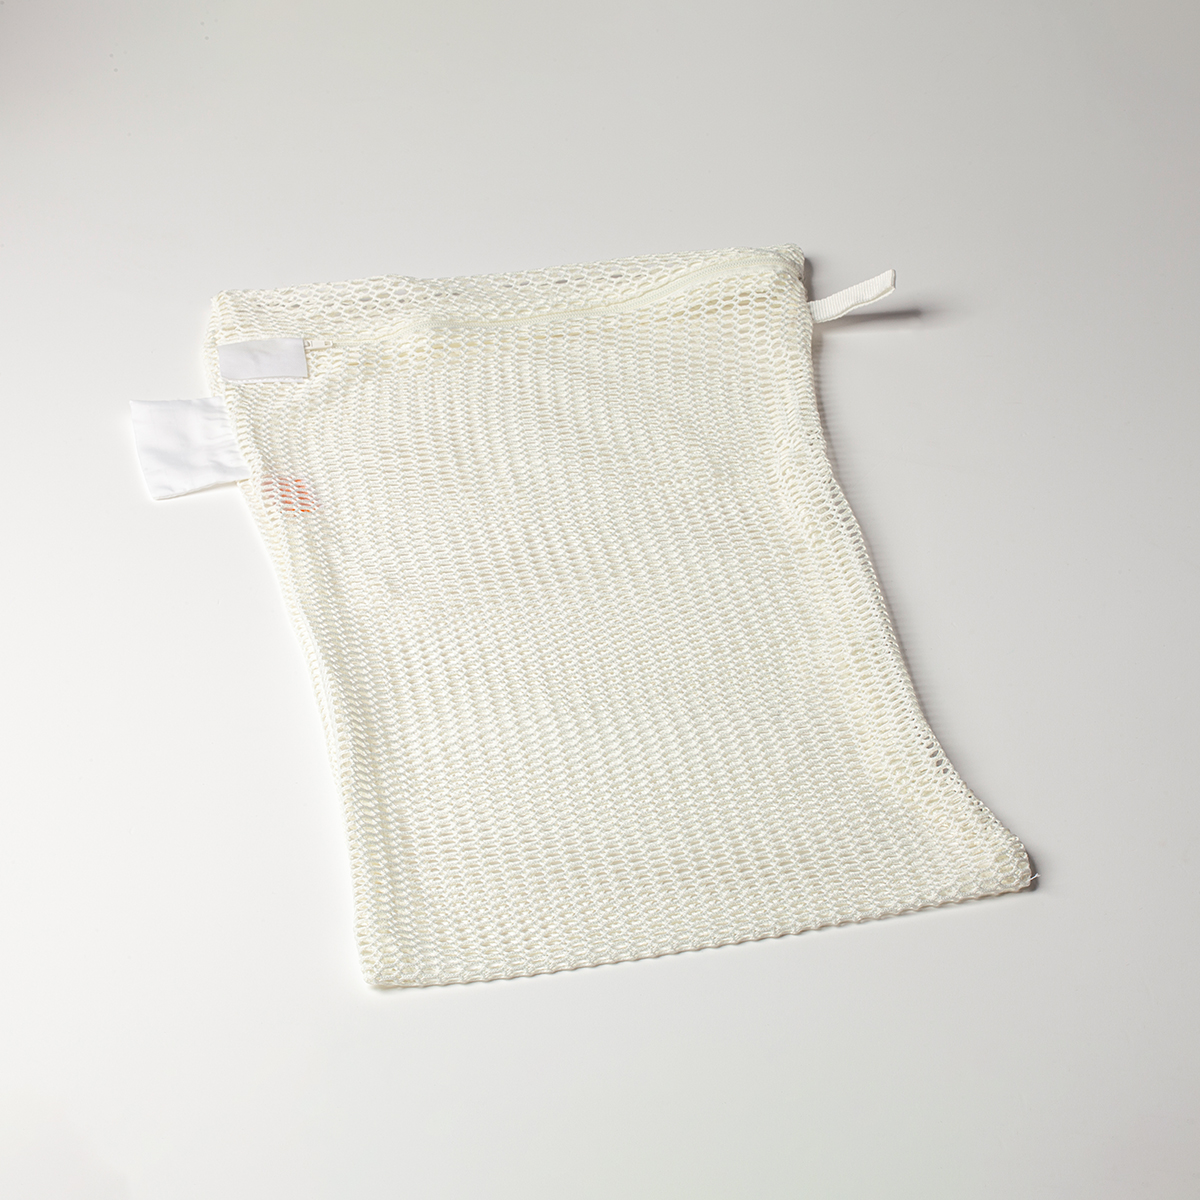 Image of Laundry Bag Mesh White - 40x60cm with loop